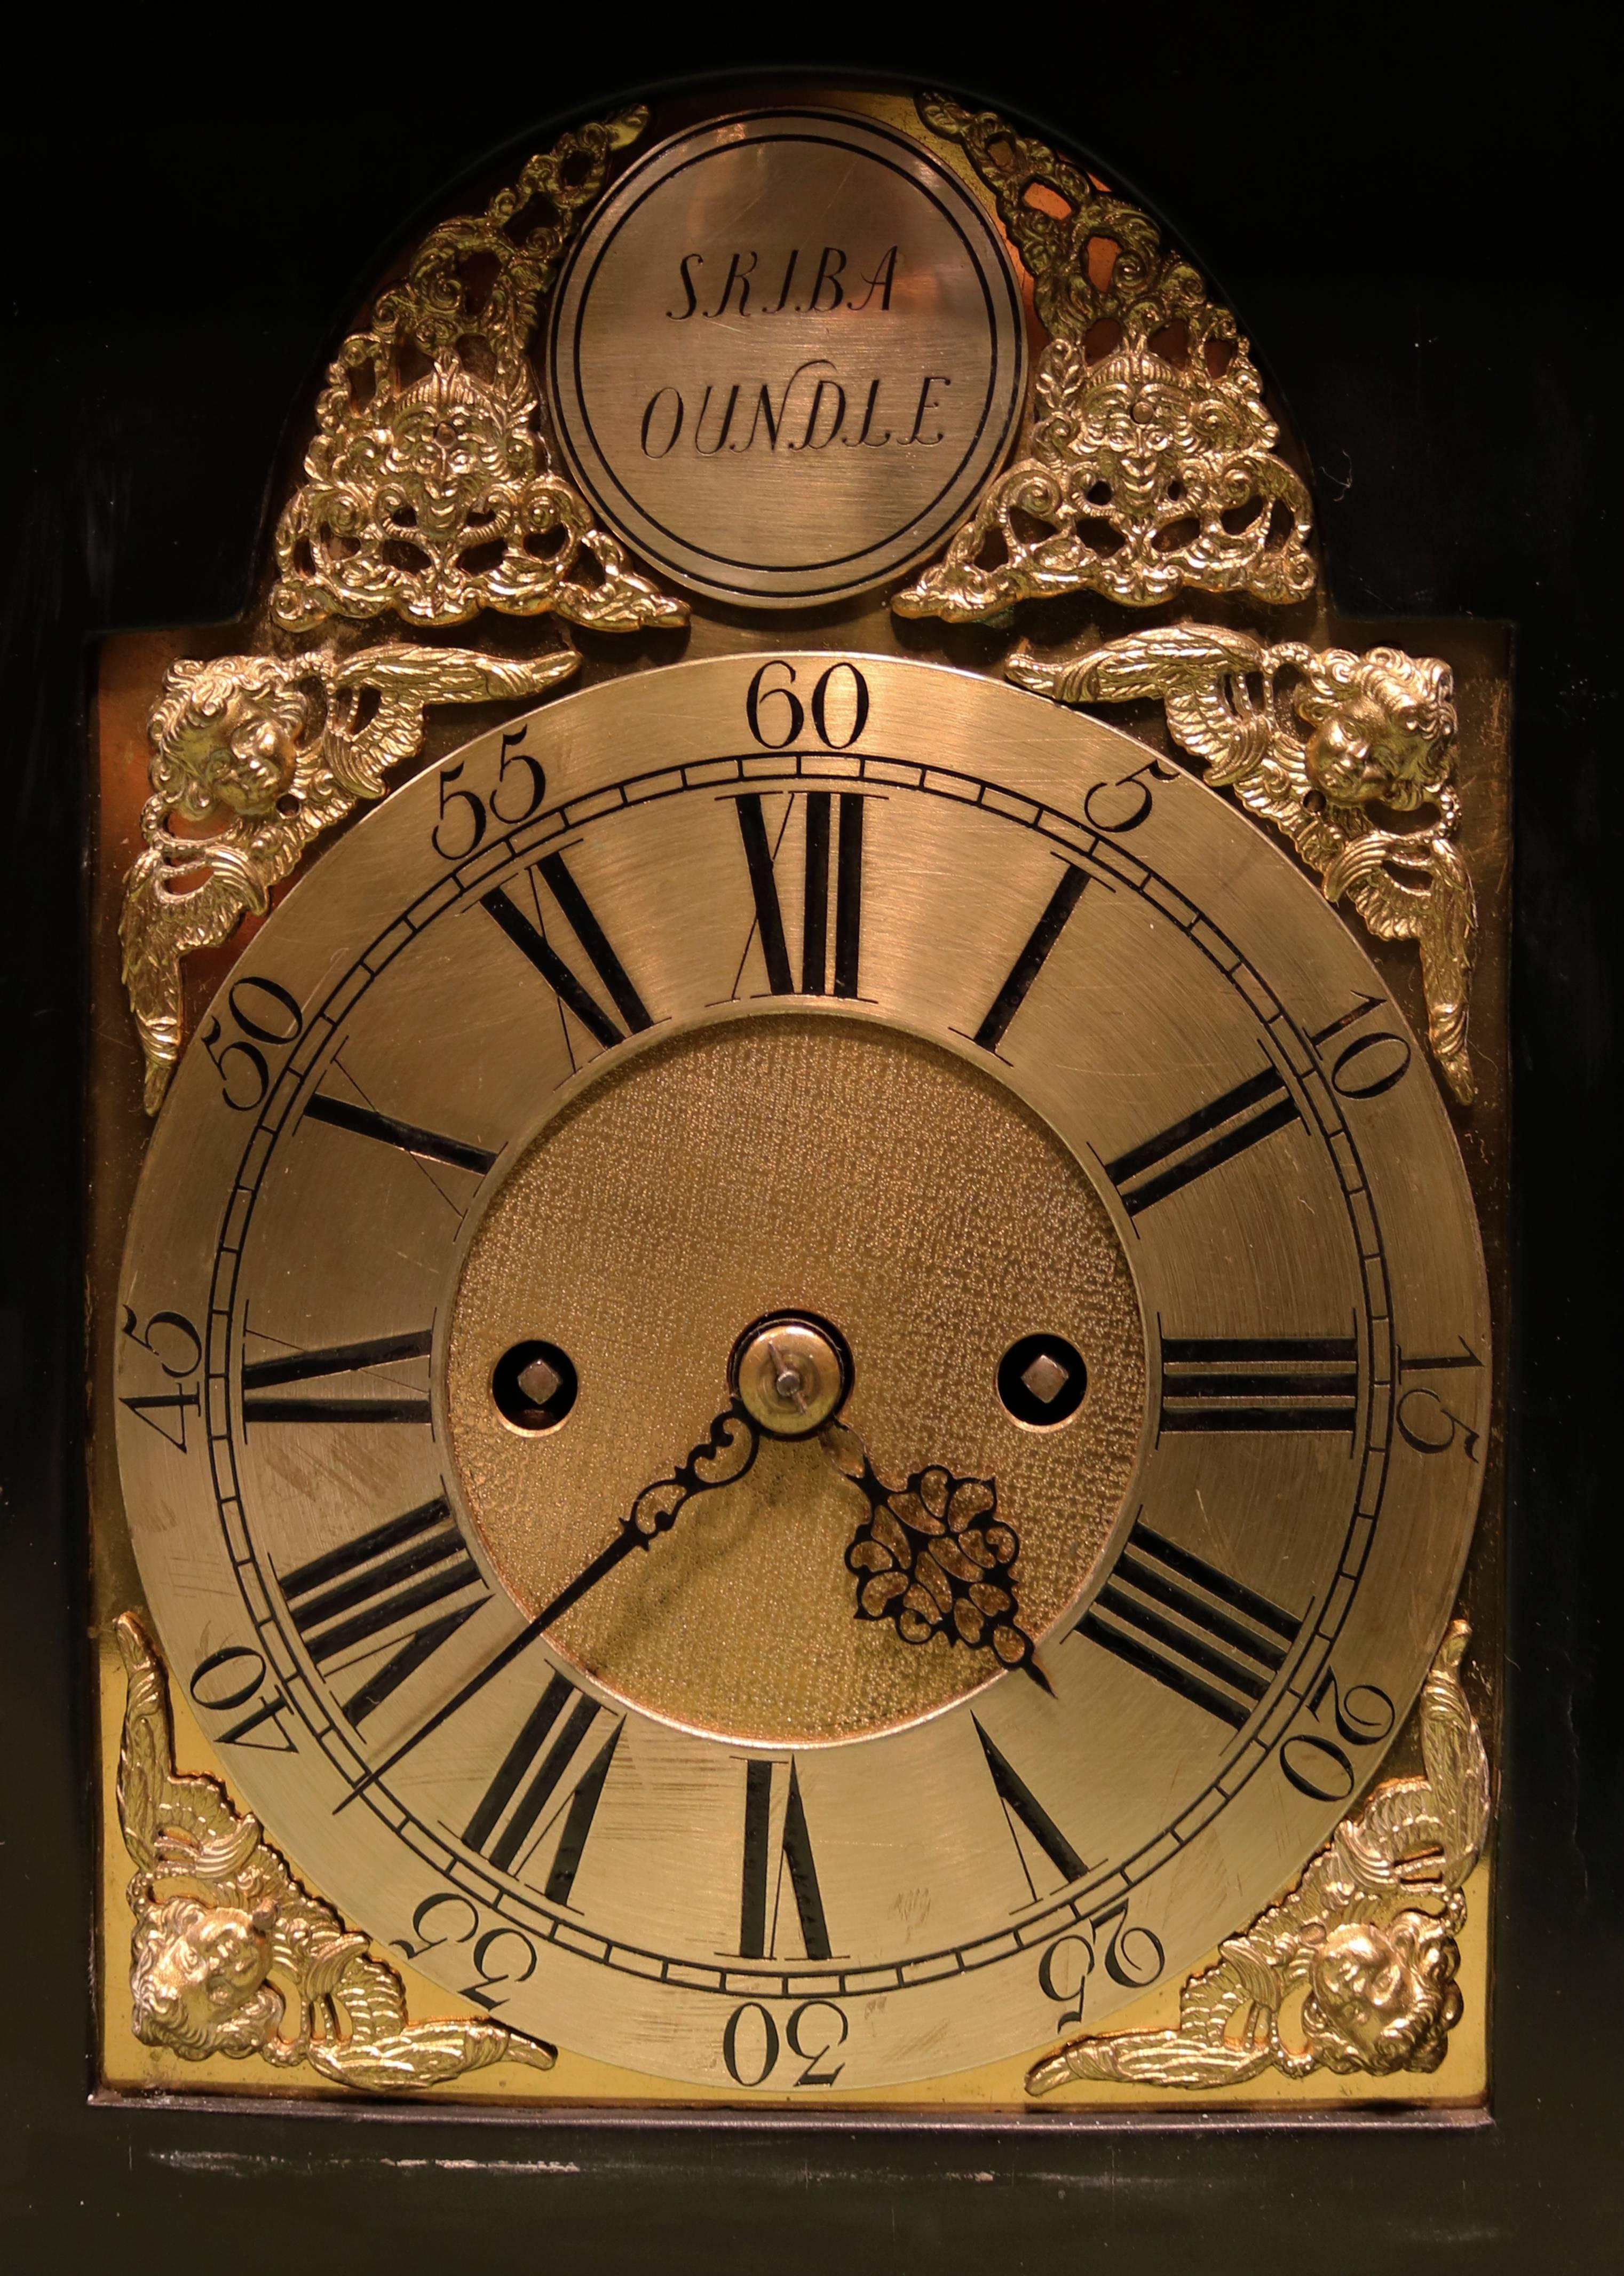 A mid-18th century bracket clock, having 8-day striking verge movement, the silvered dial signed ‘Skiba Oundle,’ contained in ebonized case with pierced brass mounts, bonnet top and brass carrying handle.